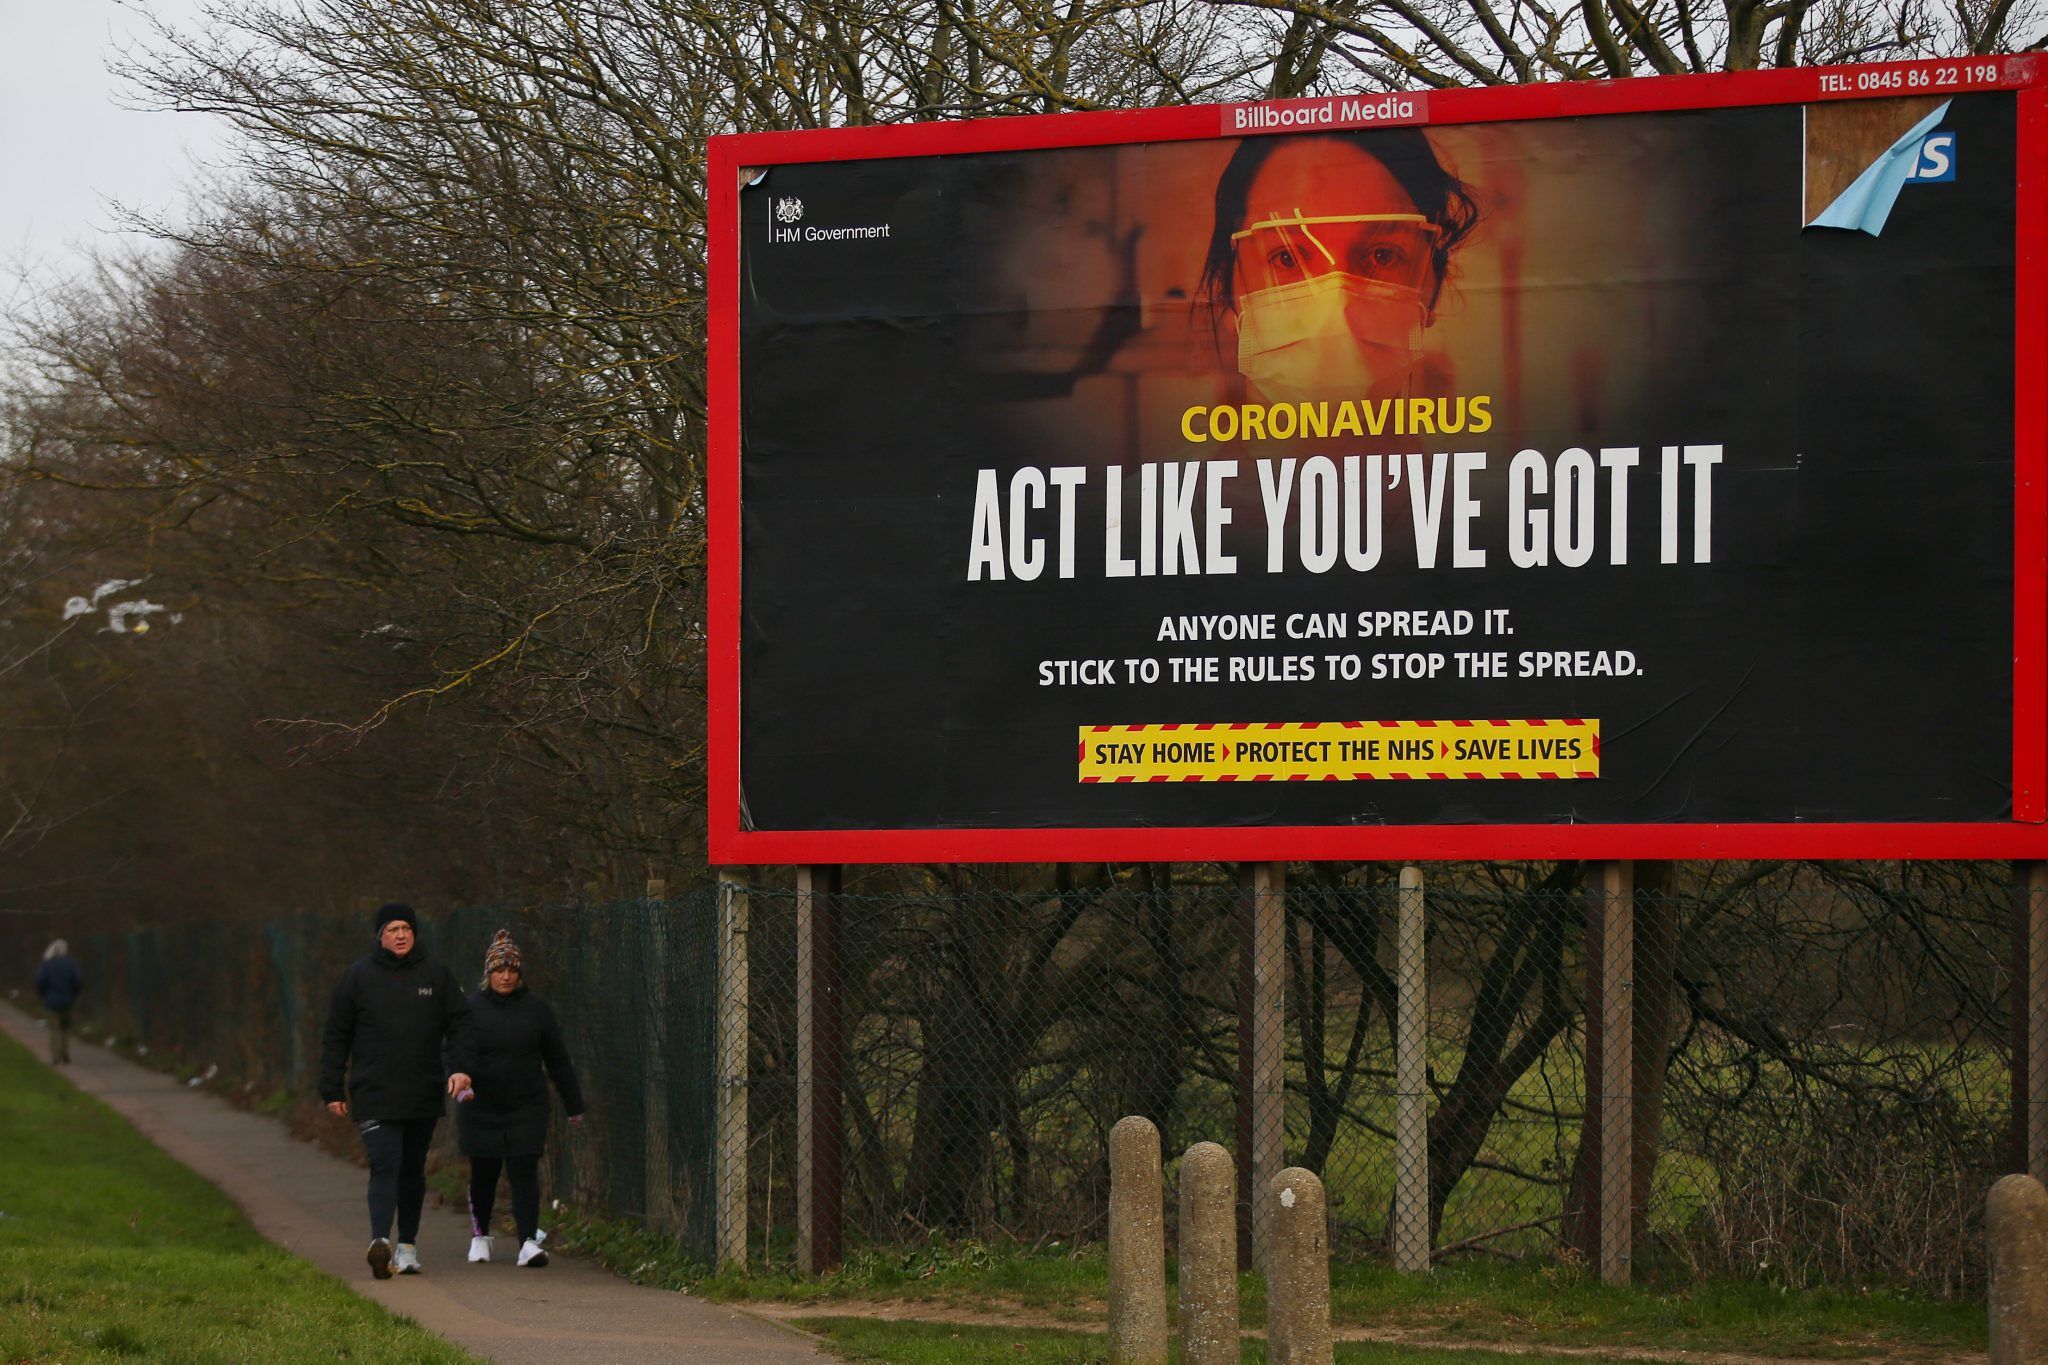 'Act like you've got it' billboard to encourage people to stay at home stop the spread of coronavirus [Photo Getty]